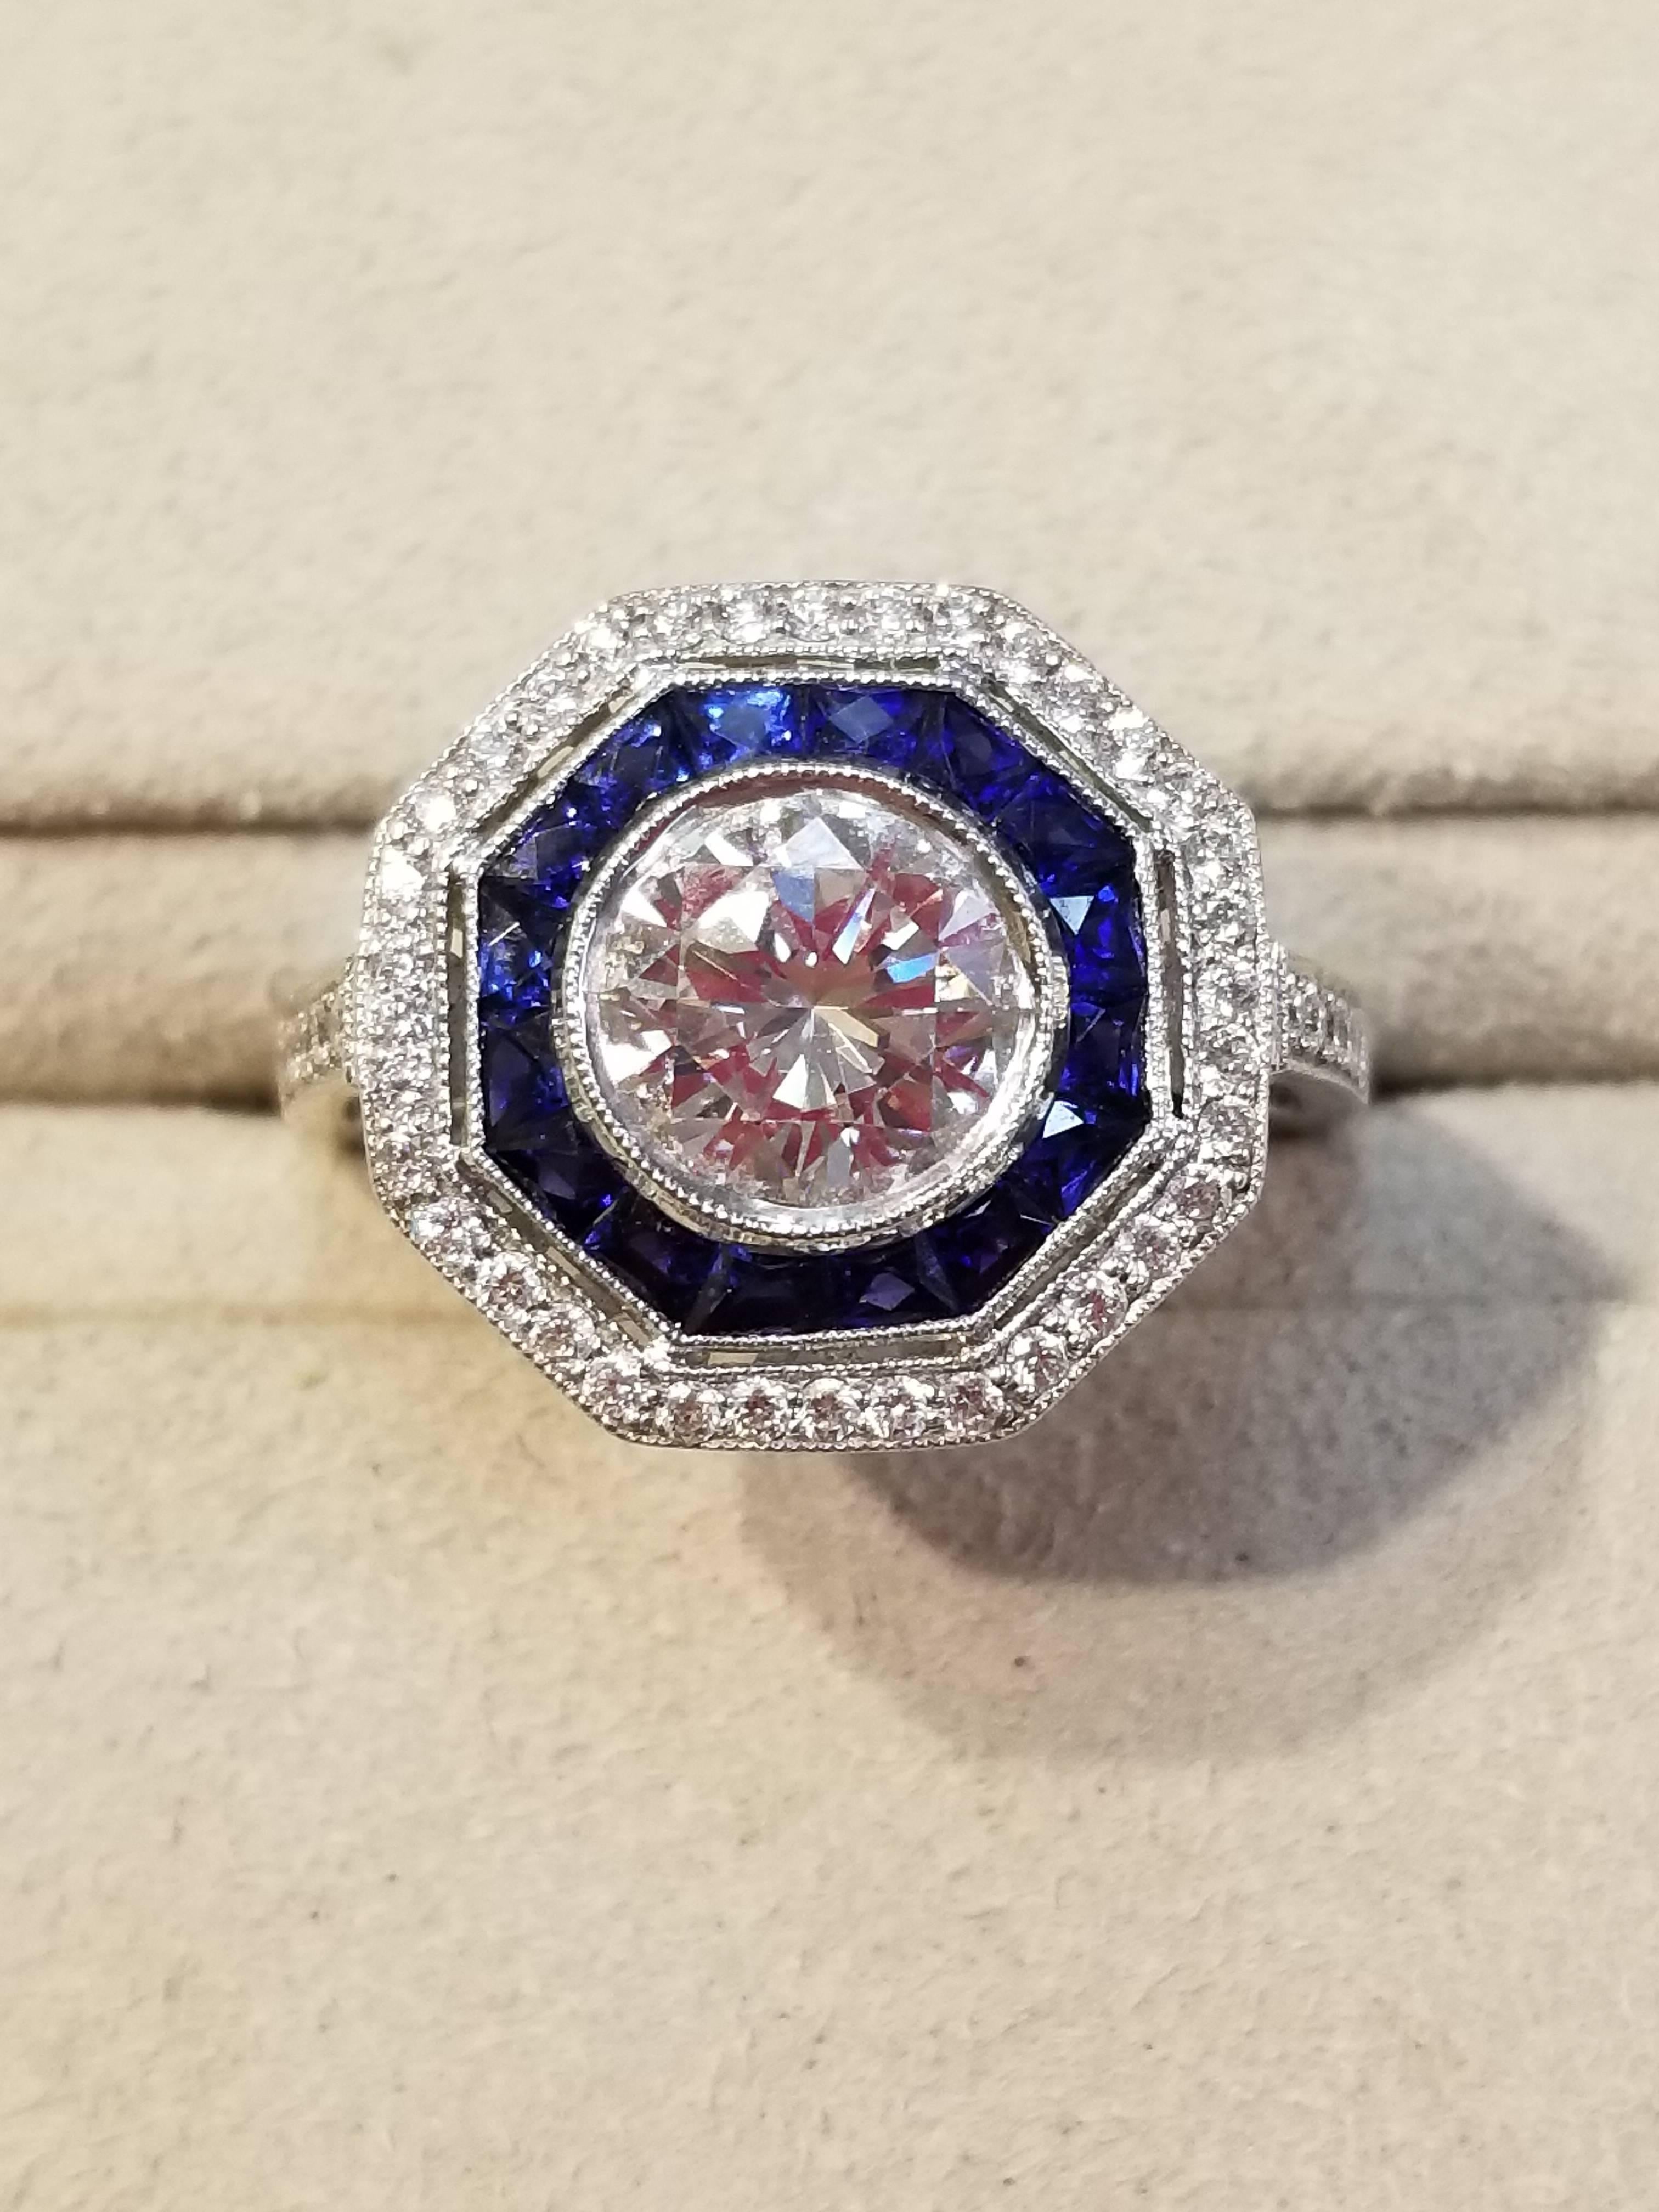 Platinum ring with diamonds and sapphires, size 6 3/4. The center diamond is 1.47 carats, E color with a VS1 clarity and is EGL certified (EGL US59615301D). The surrounding 46 diamonds total 0.3 carats and are G-H color and VS clarity. The sapphires